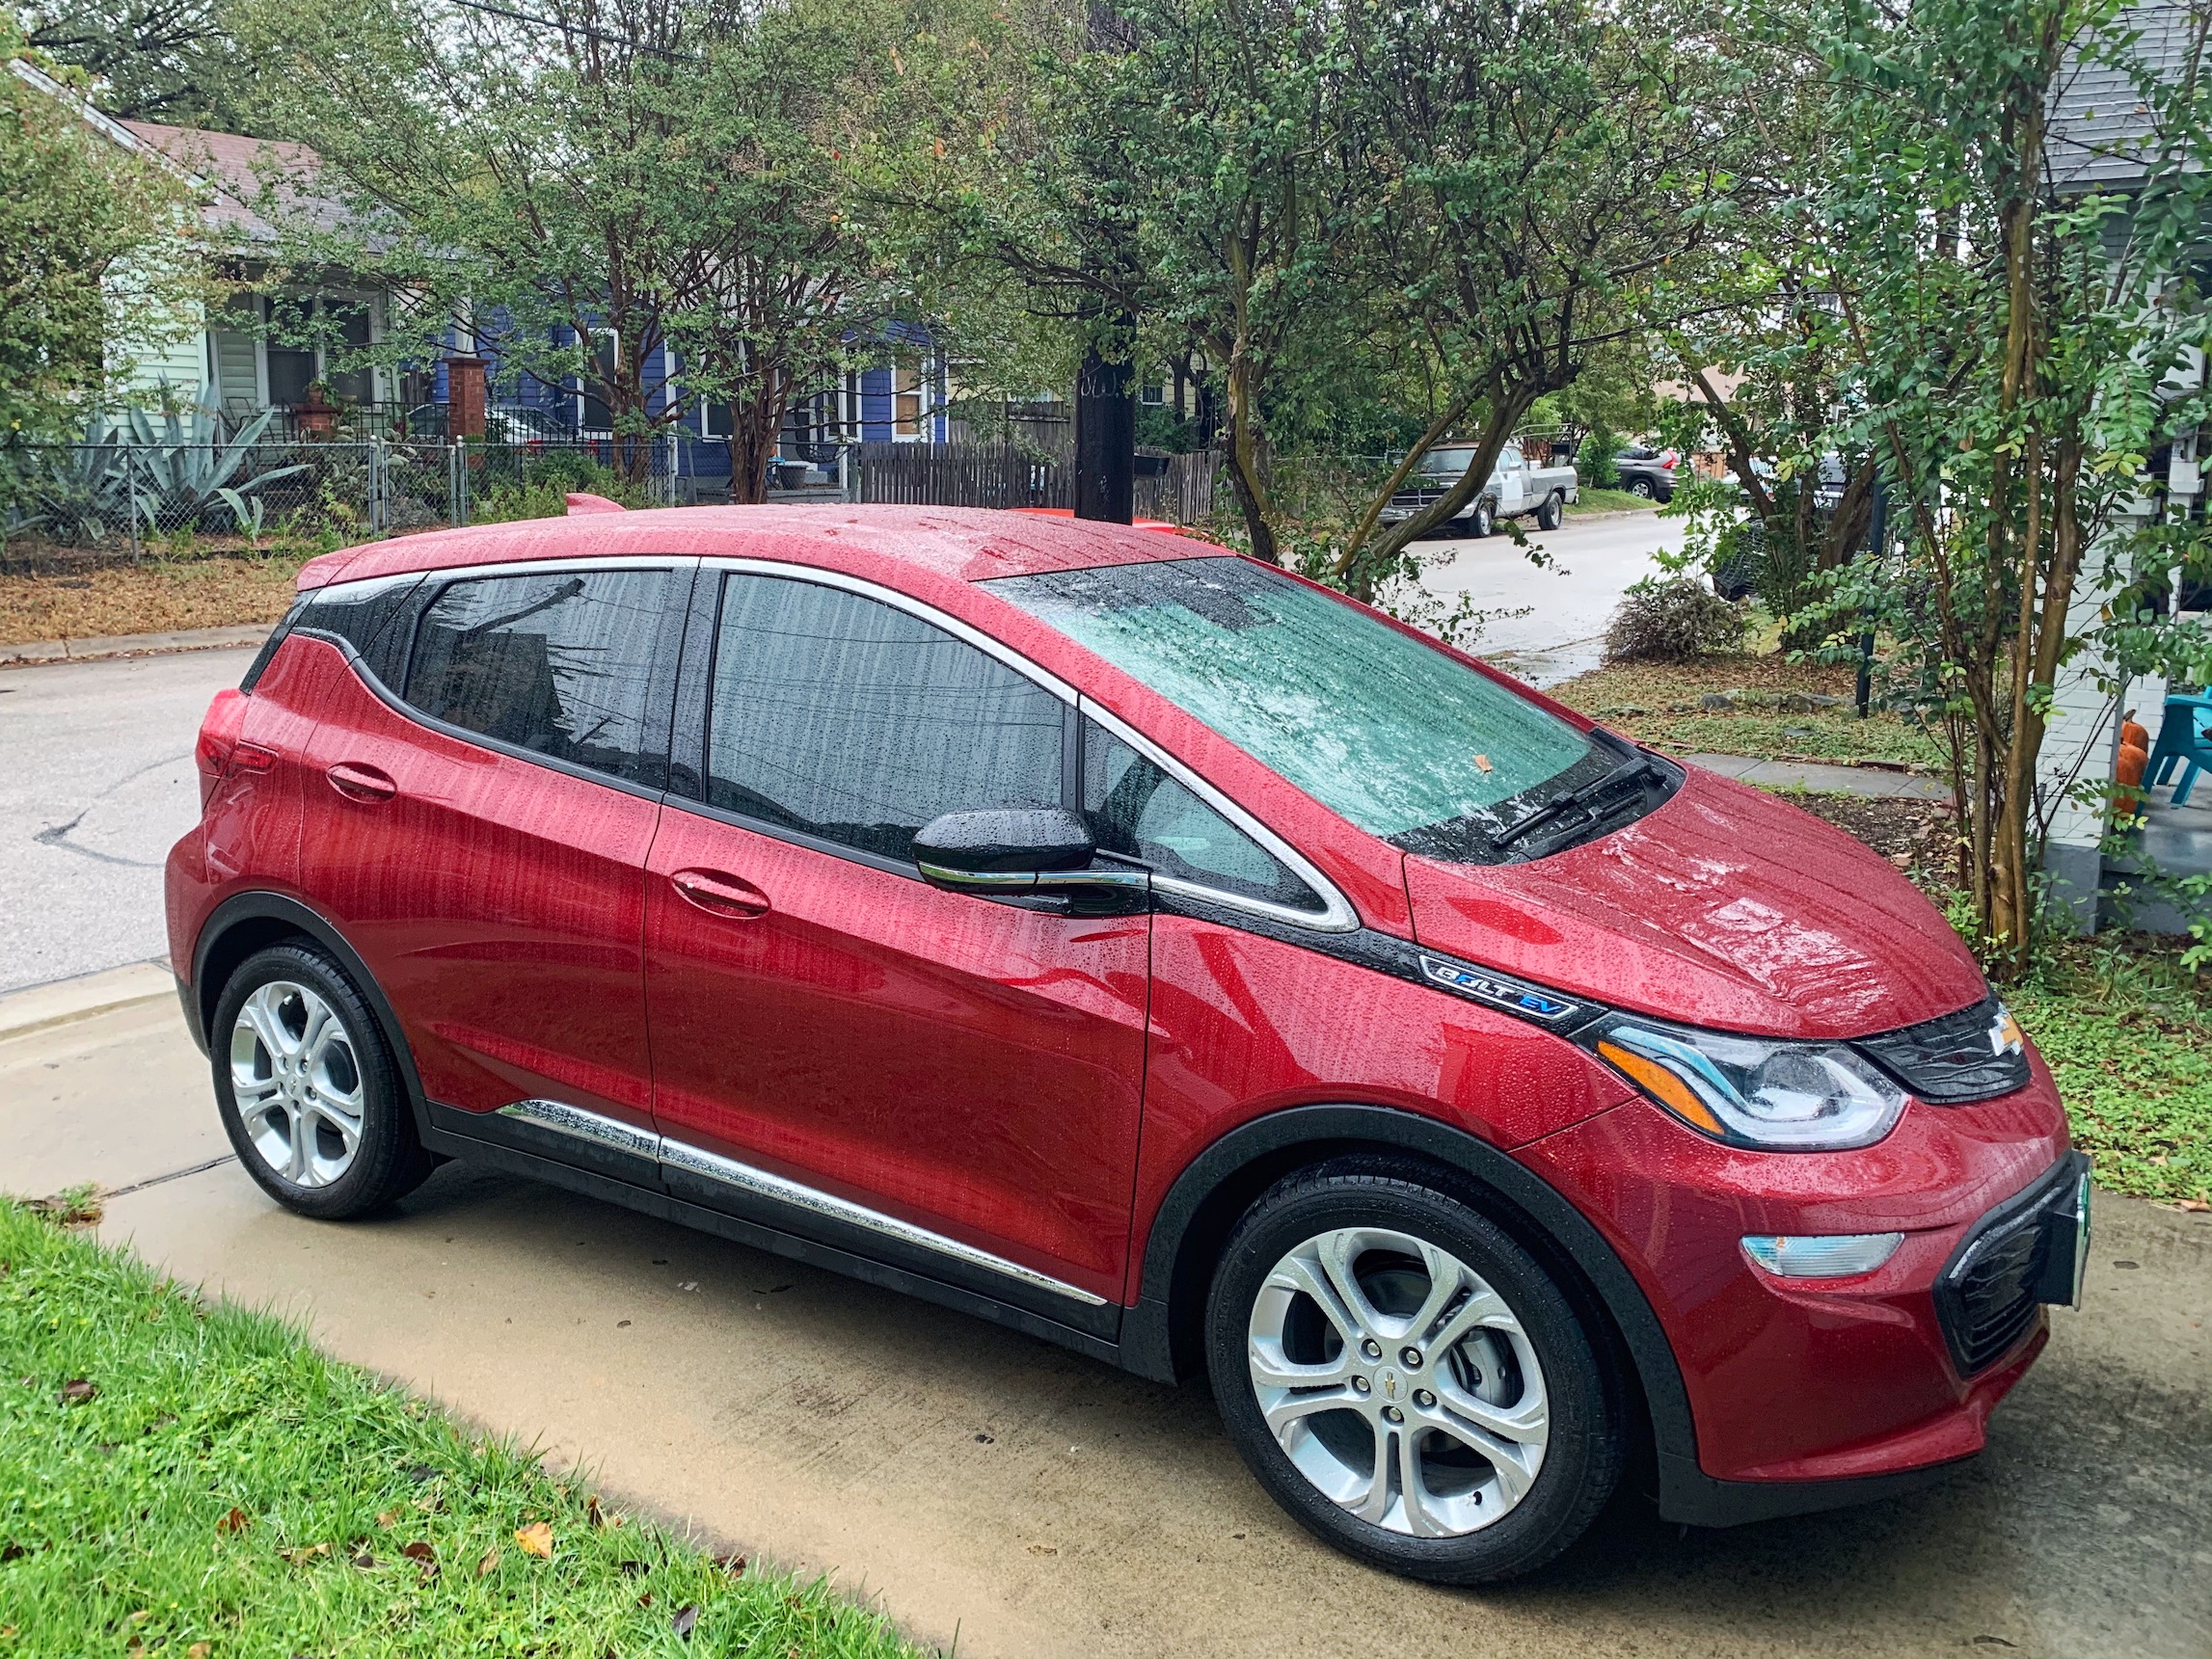 2020-chevy-bolt-premier-44425-msrp-one-pay-6862-after-nj-5000-rebate-1862-share-deals